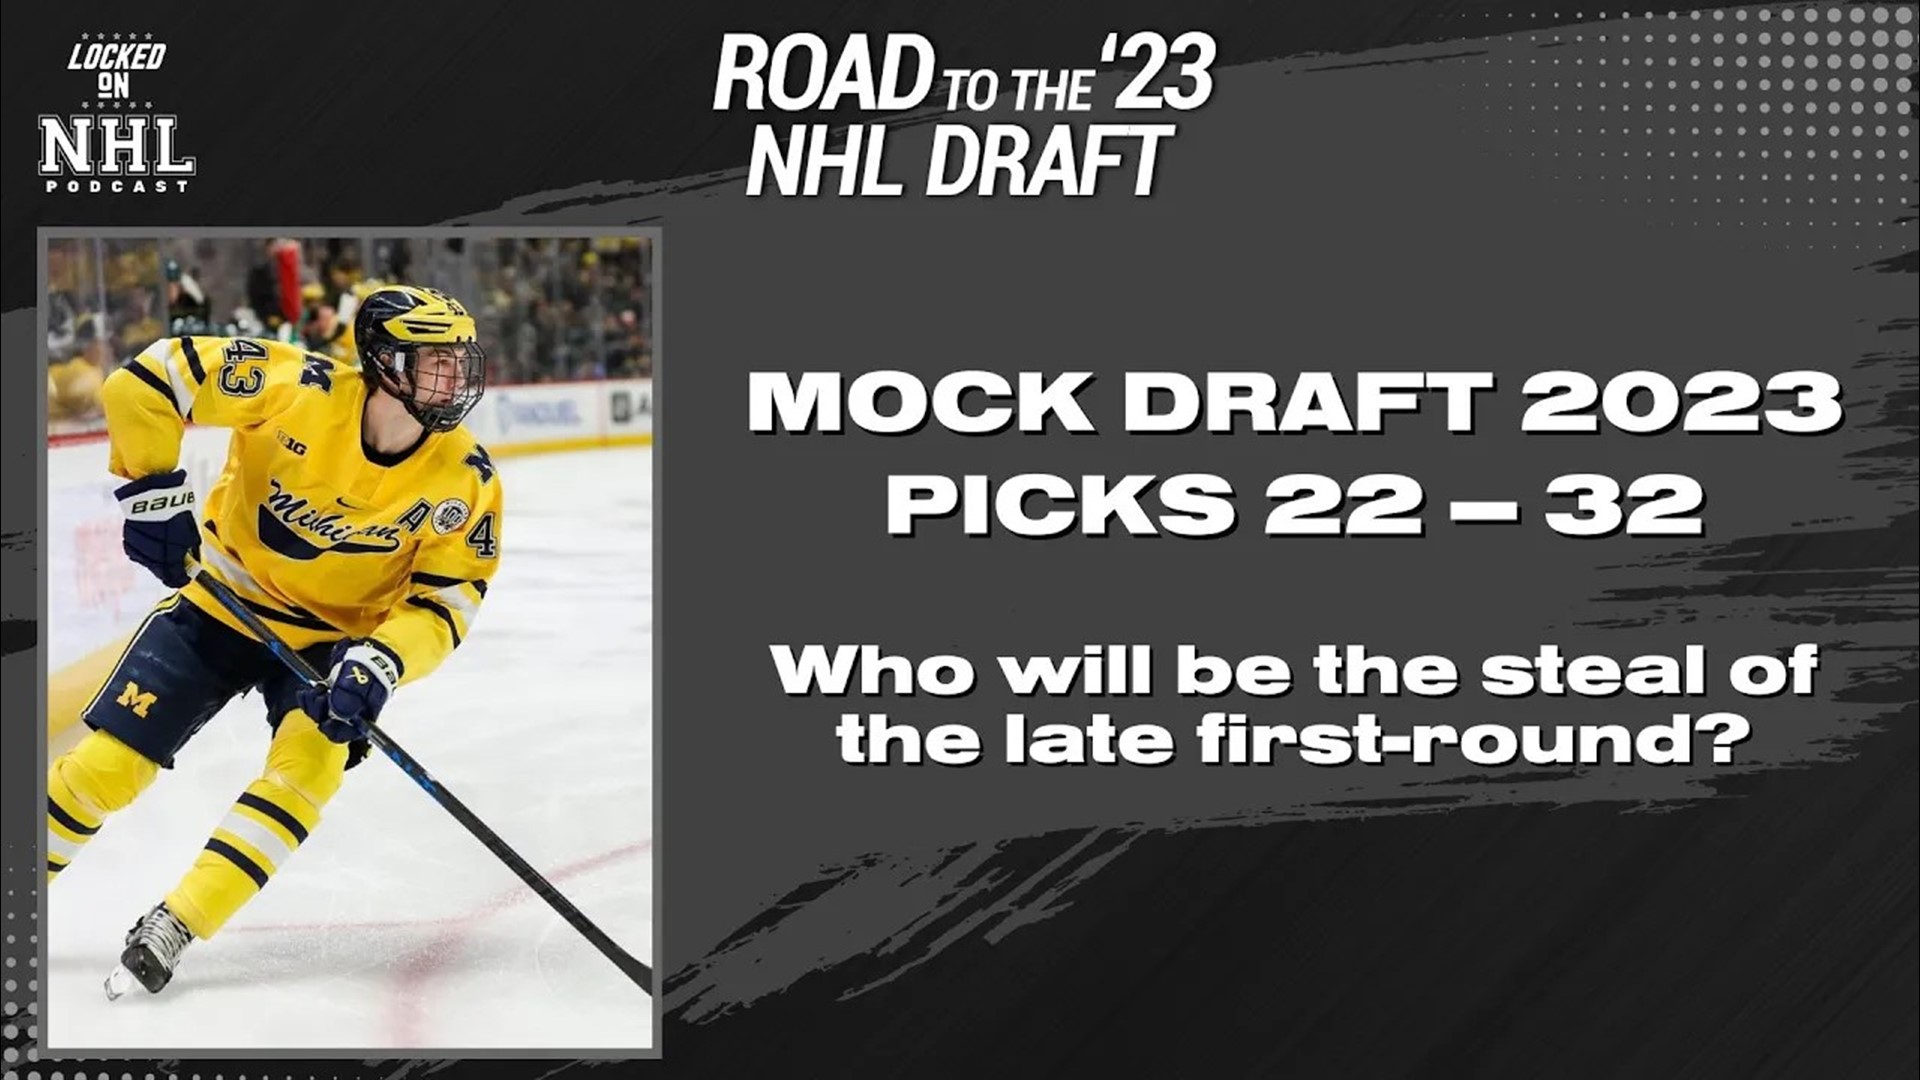 Will there be any steals late in the 1st round of 2023 NHL Draft